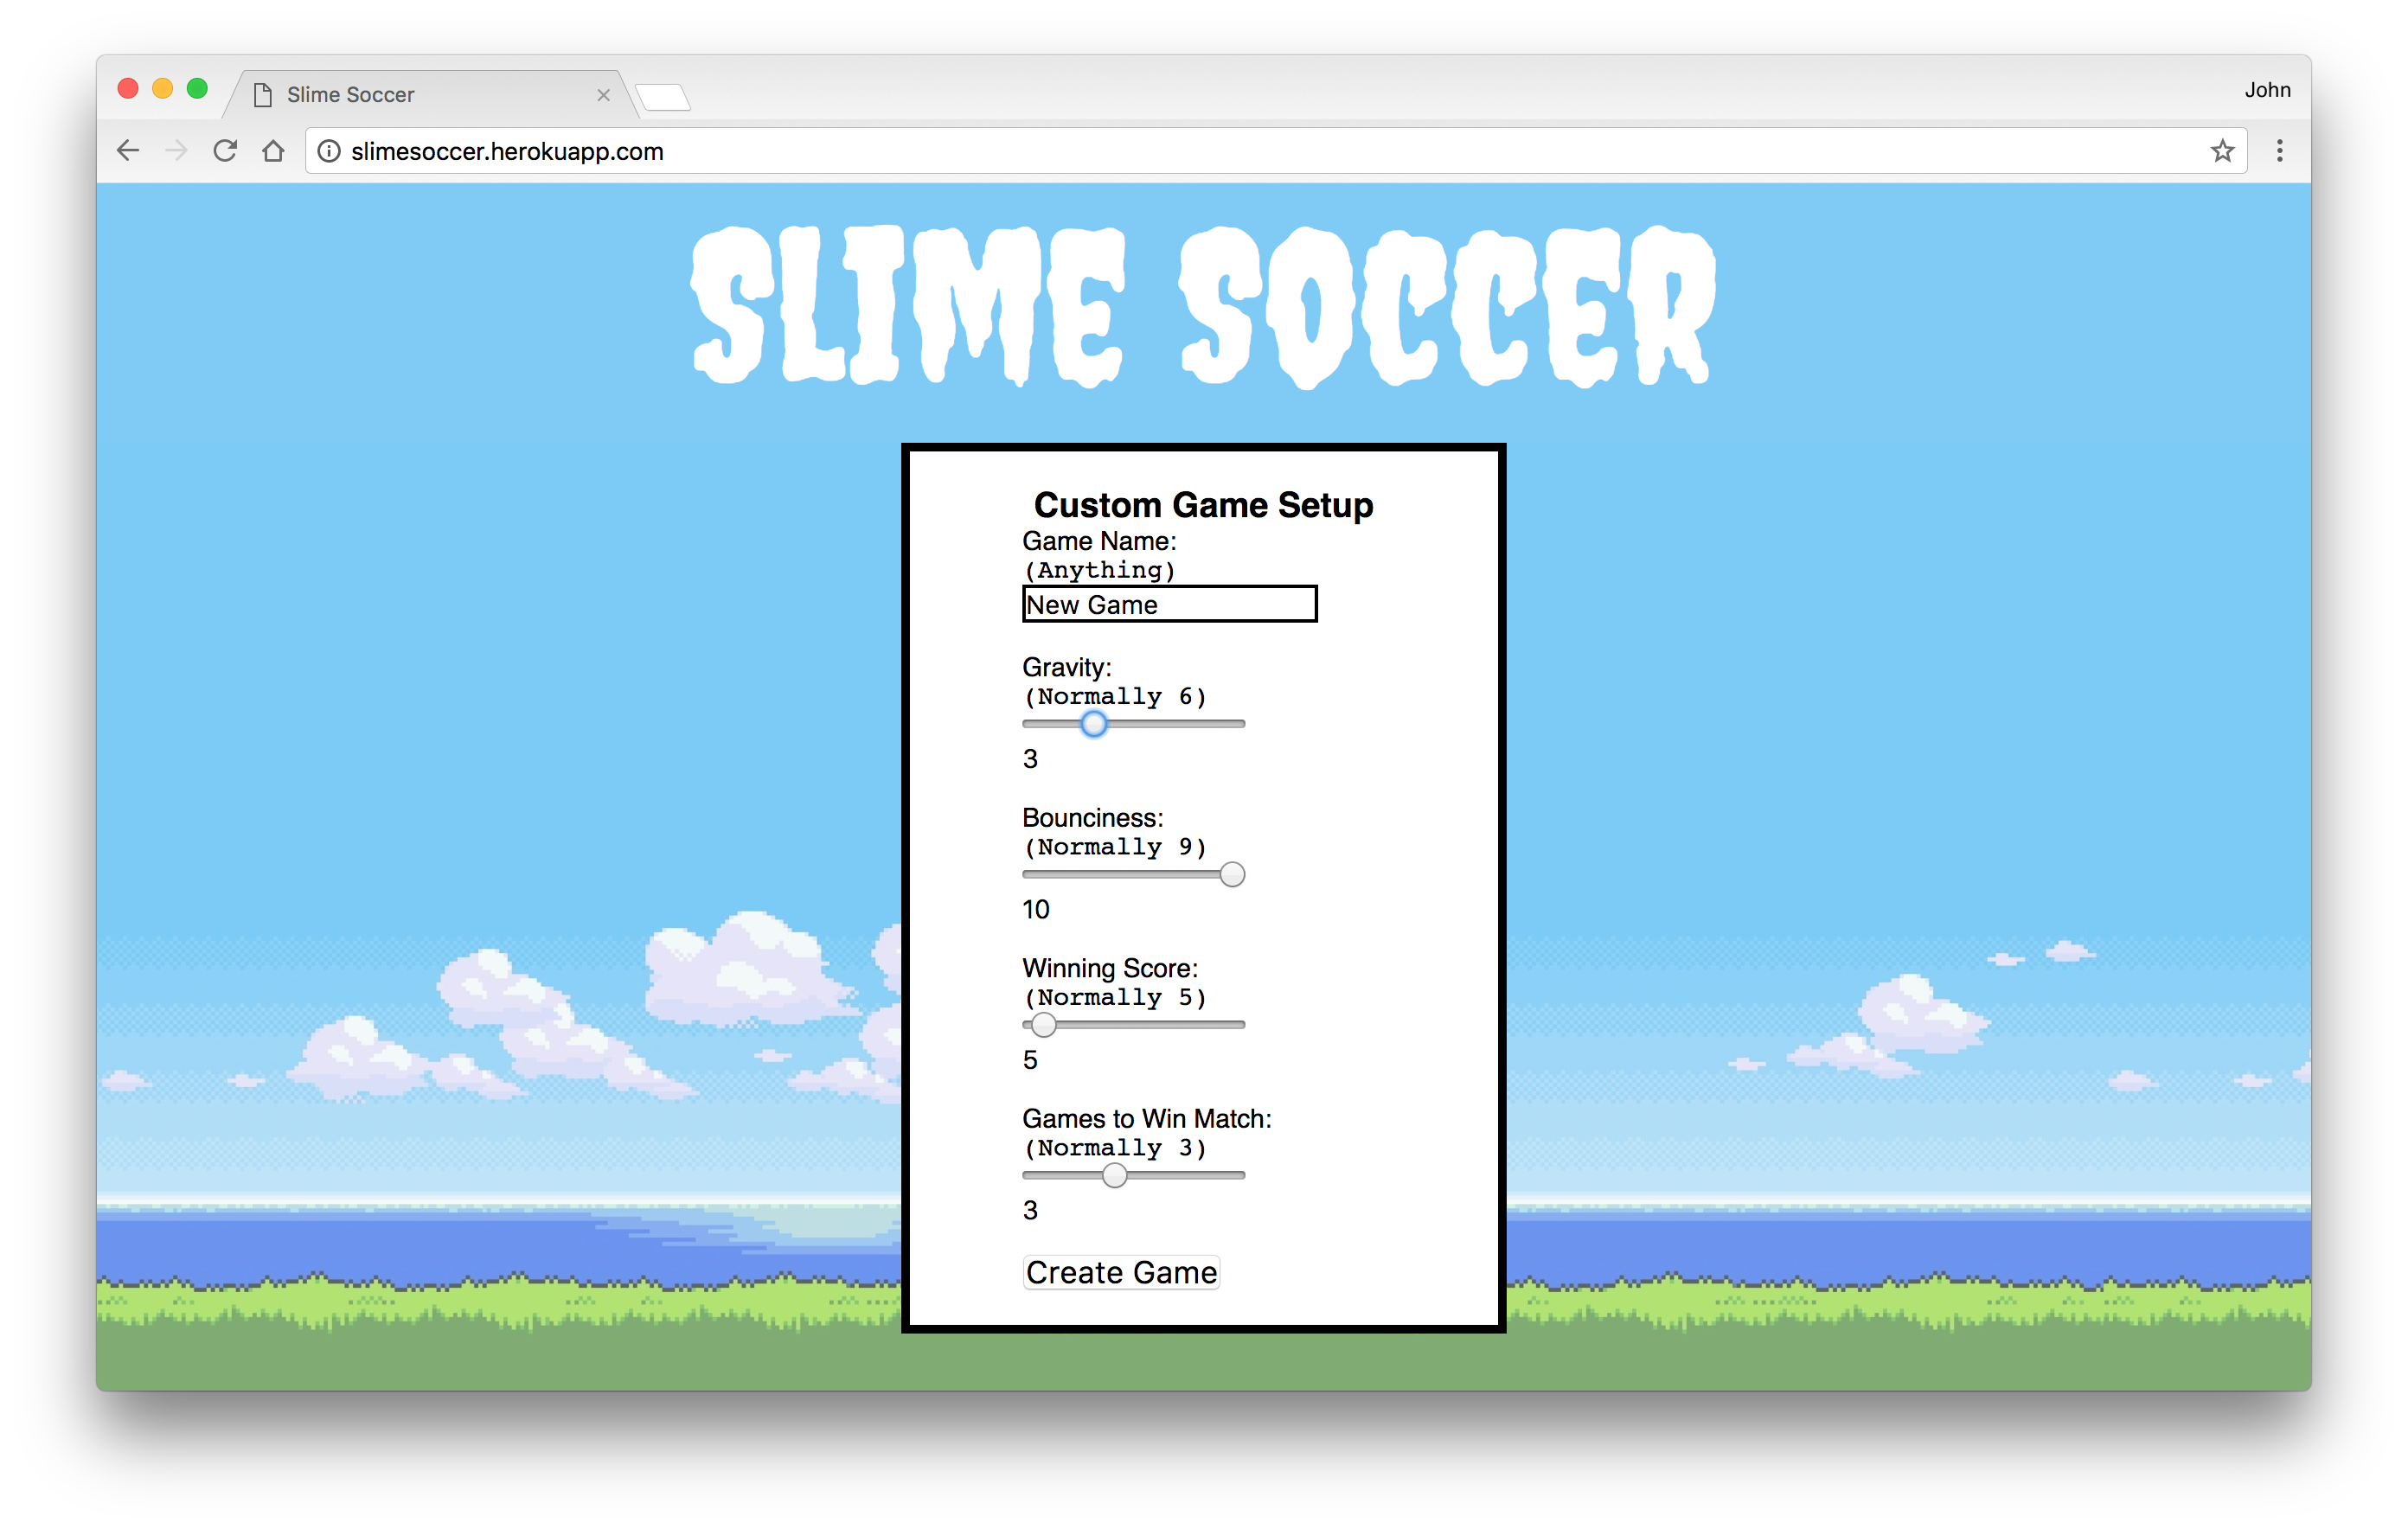 Users can create games with custom settings